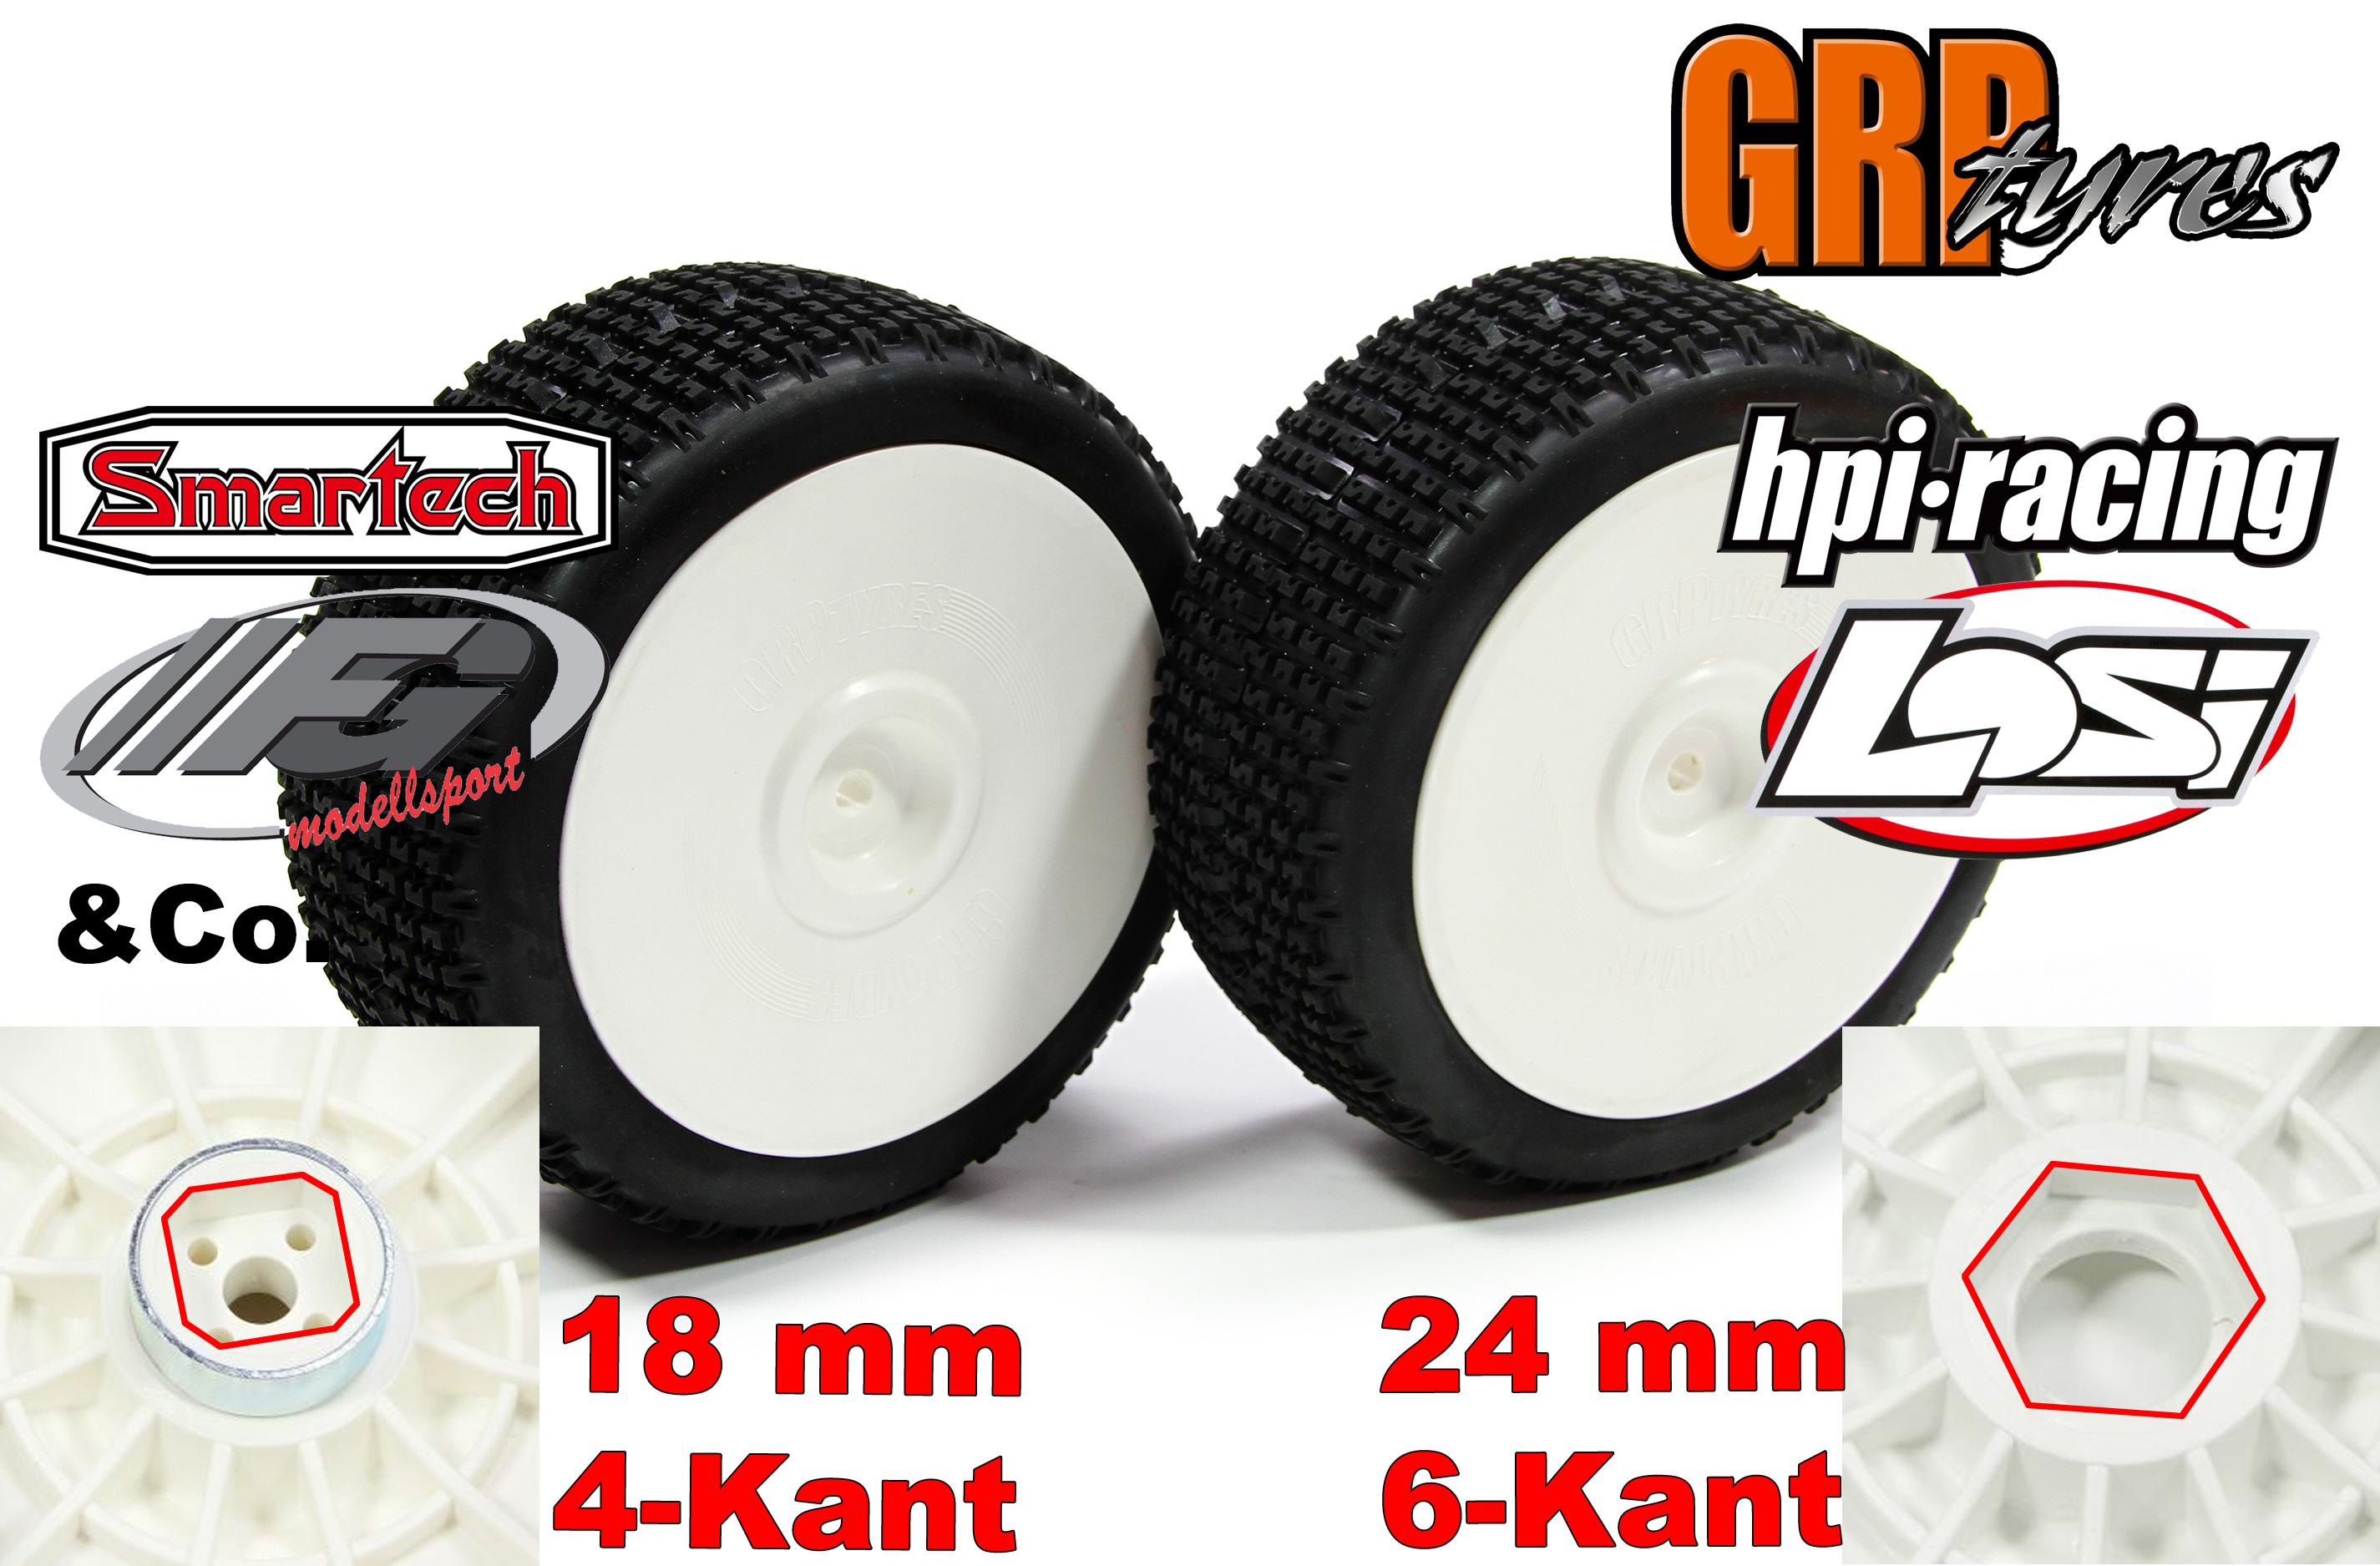 GW90 GRP-MICRO off-road race tires (S and P), complete glued on rims